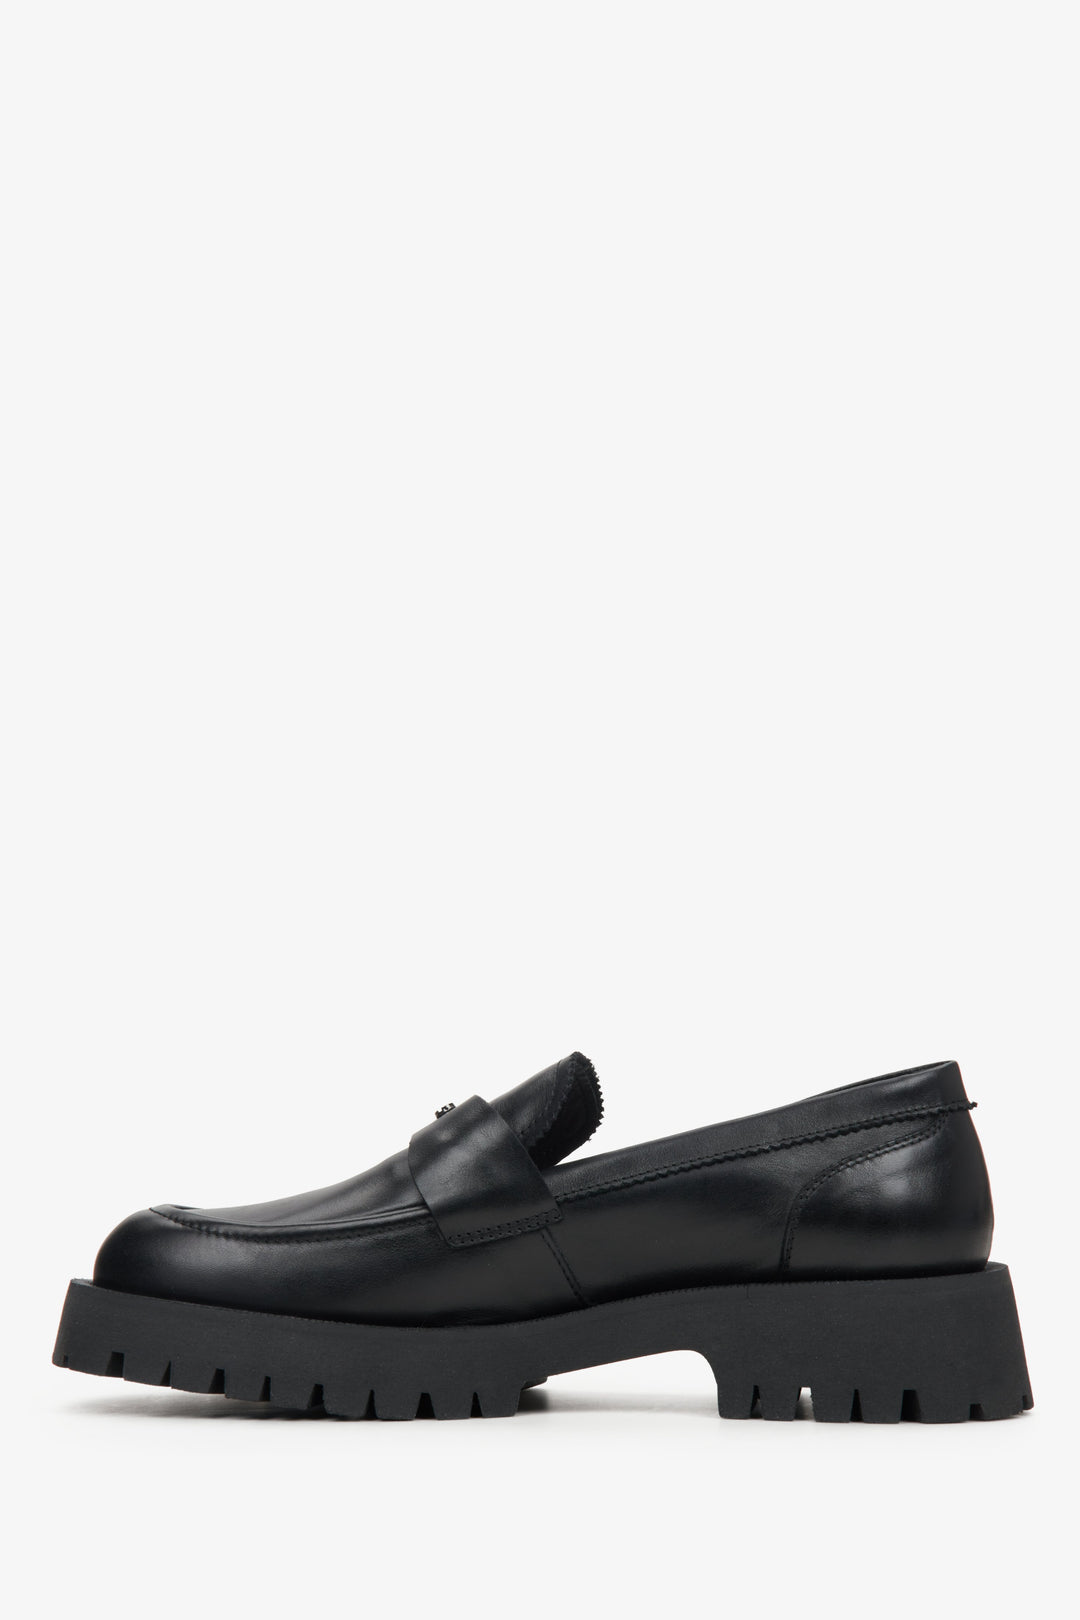 Women's black loafers made of genuine leather with a chunky sole by Estro - shoe profile.